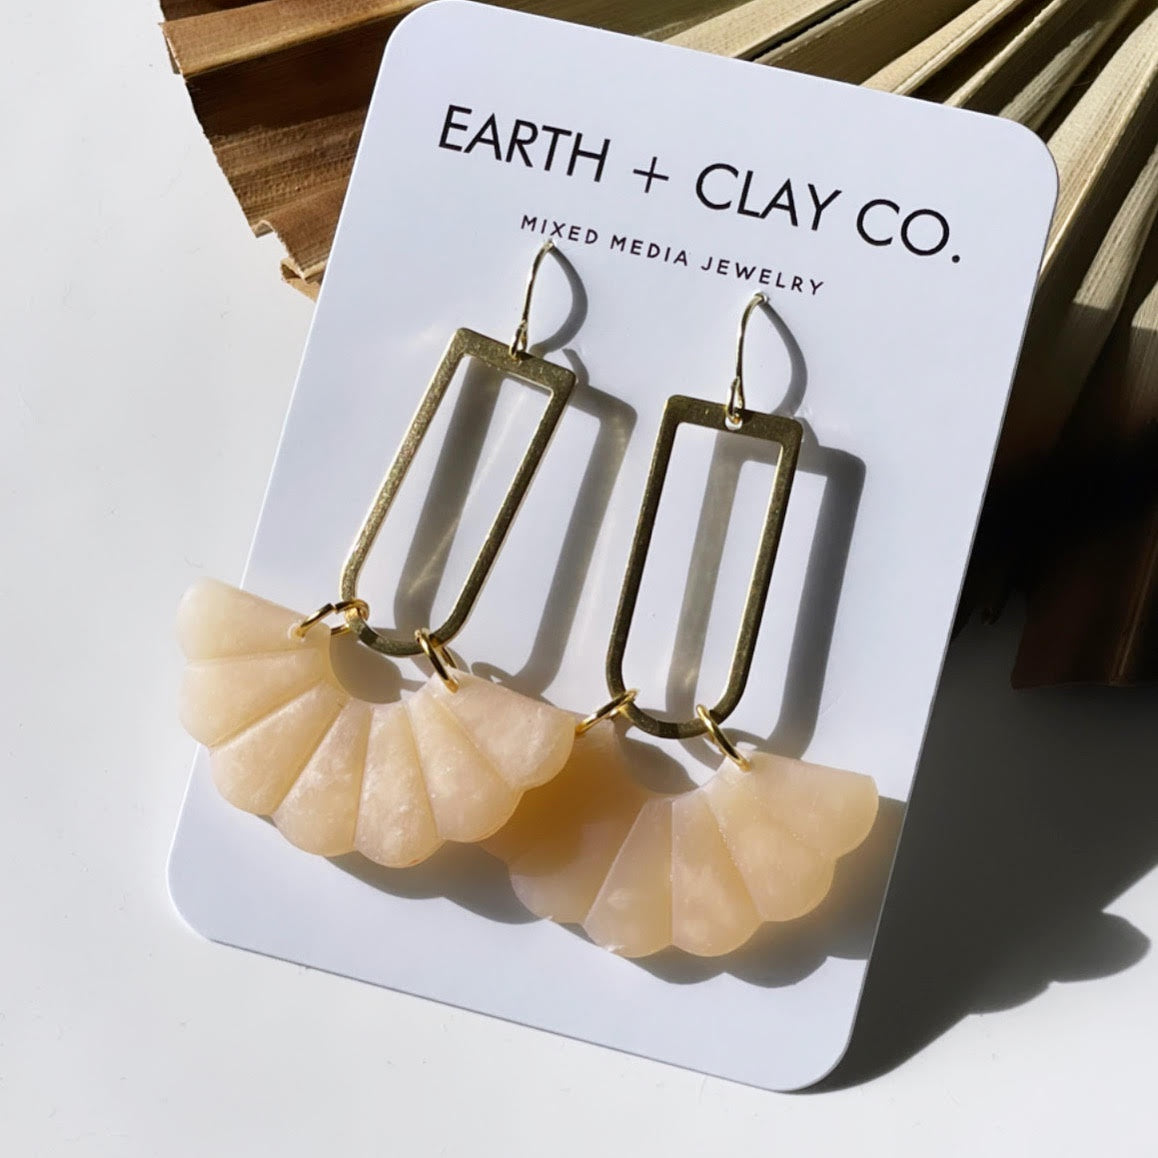 The Translucent Lolita Earrings by Earth + Clay Collective